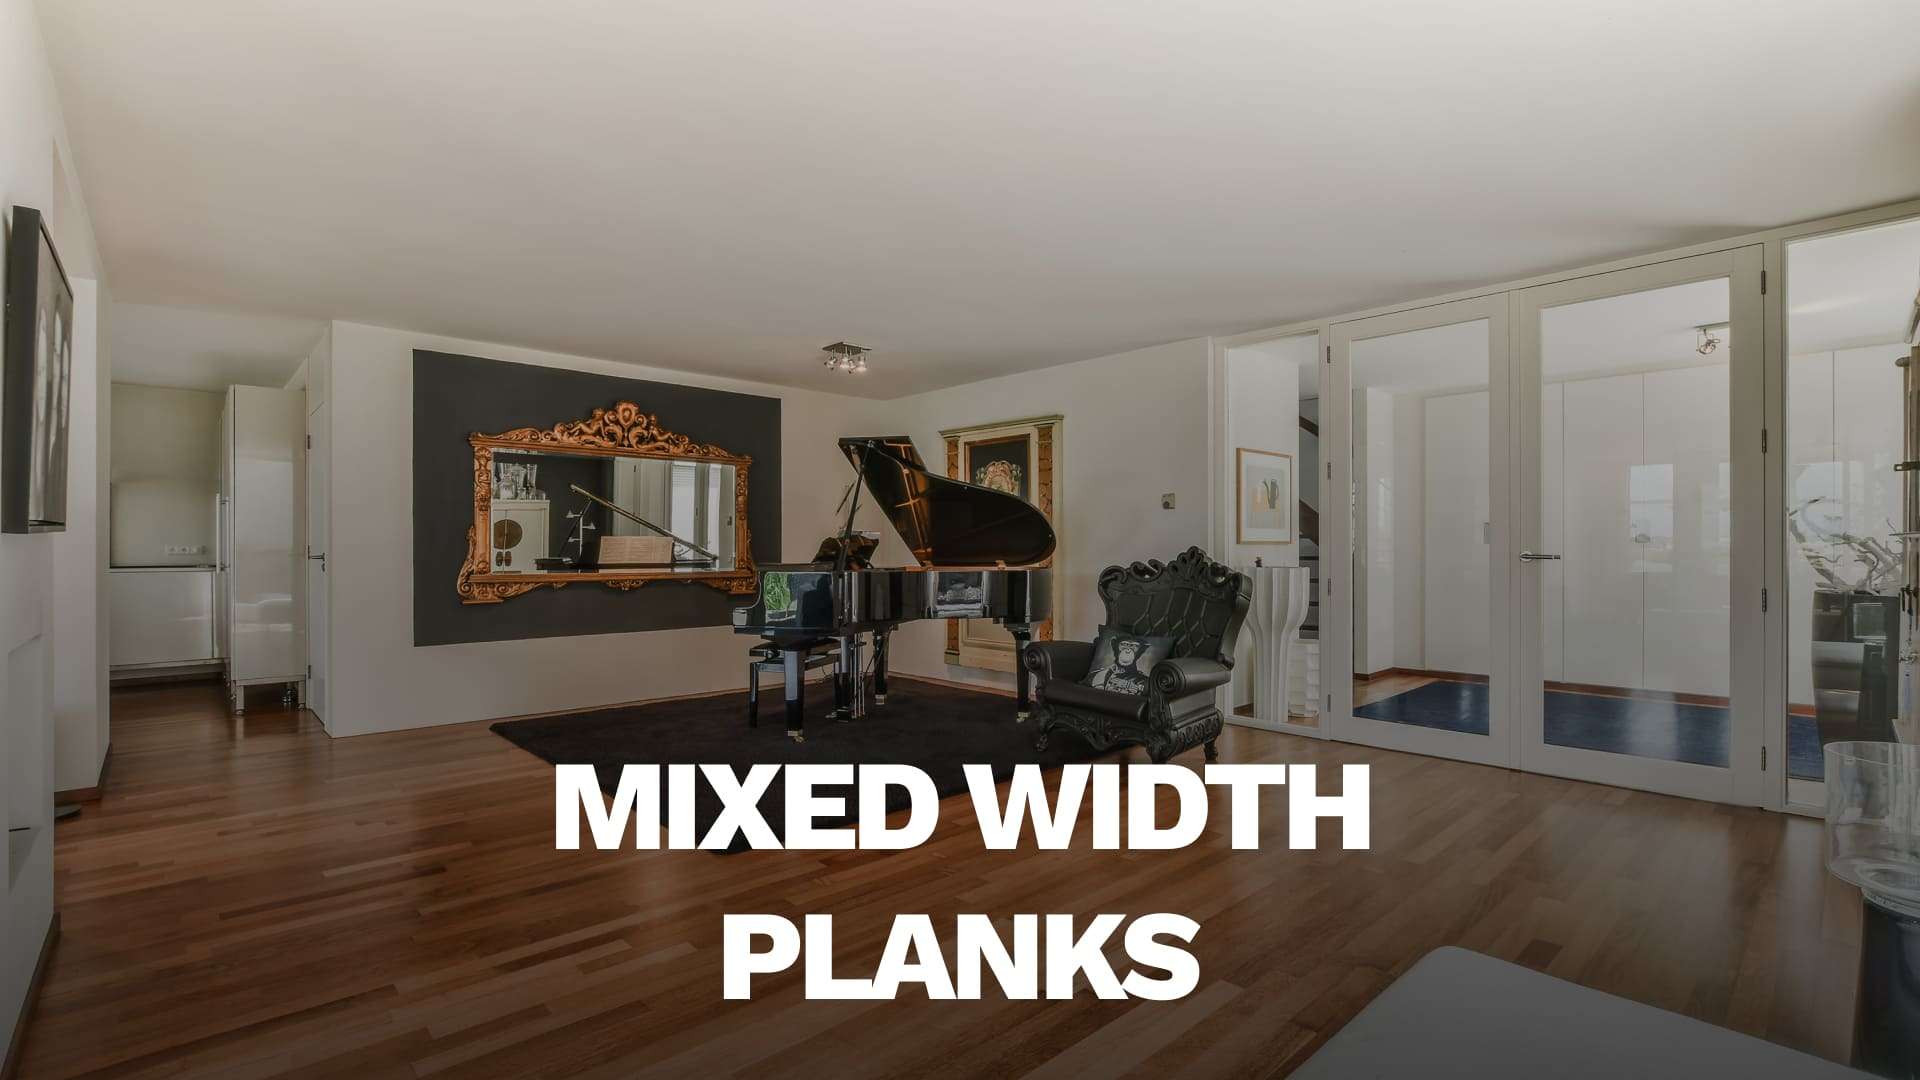 Mixed Width Planks